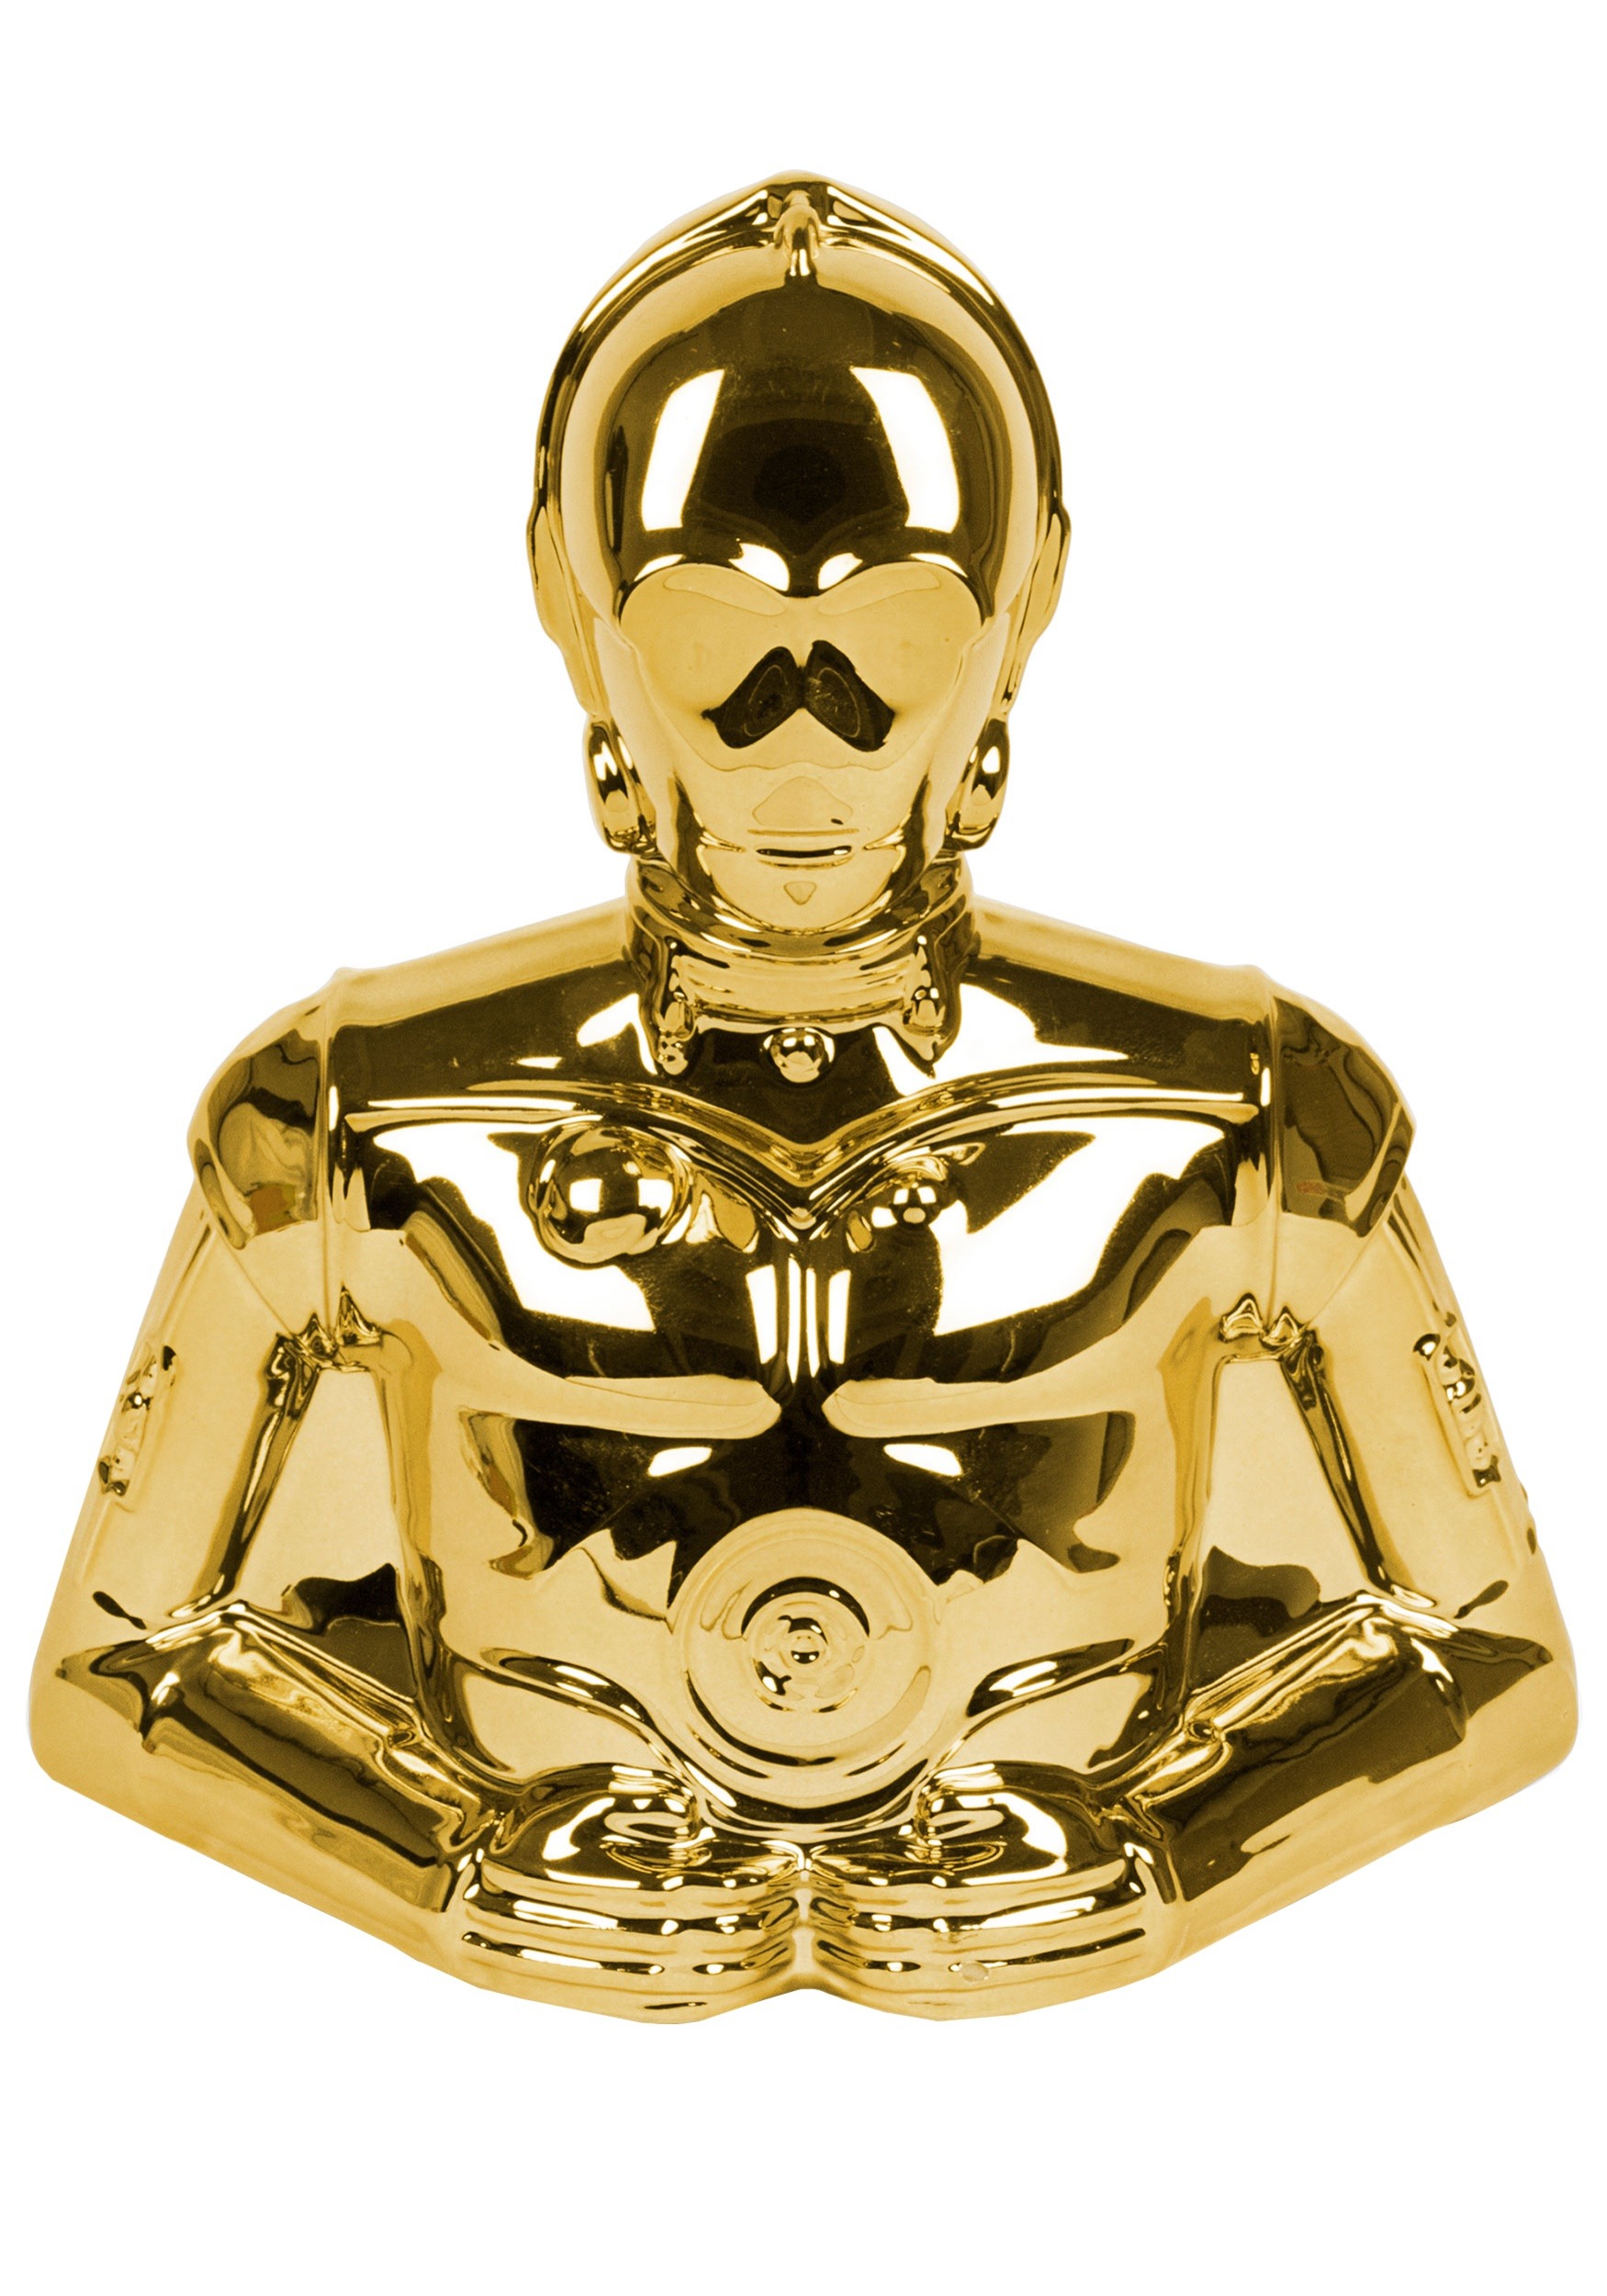 C3po Star Wars Gold Electroplated Coin Bank